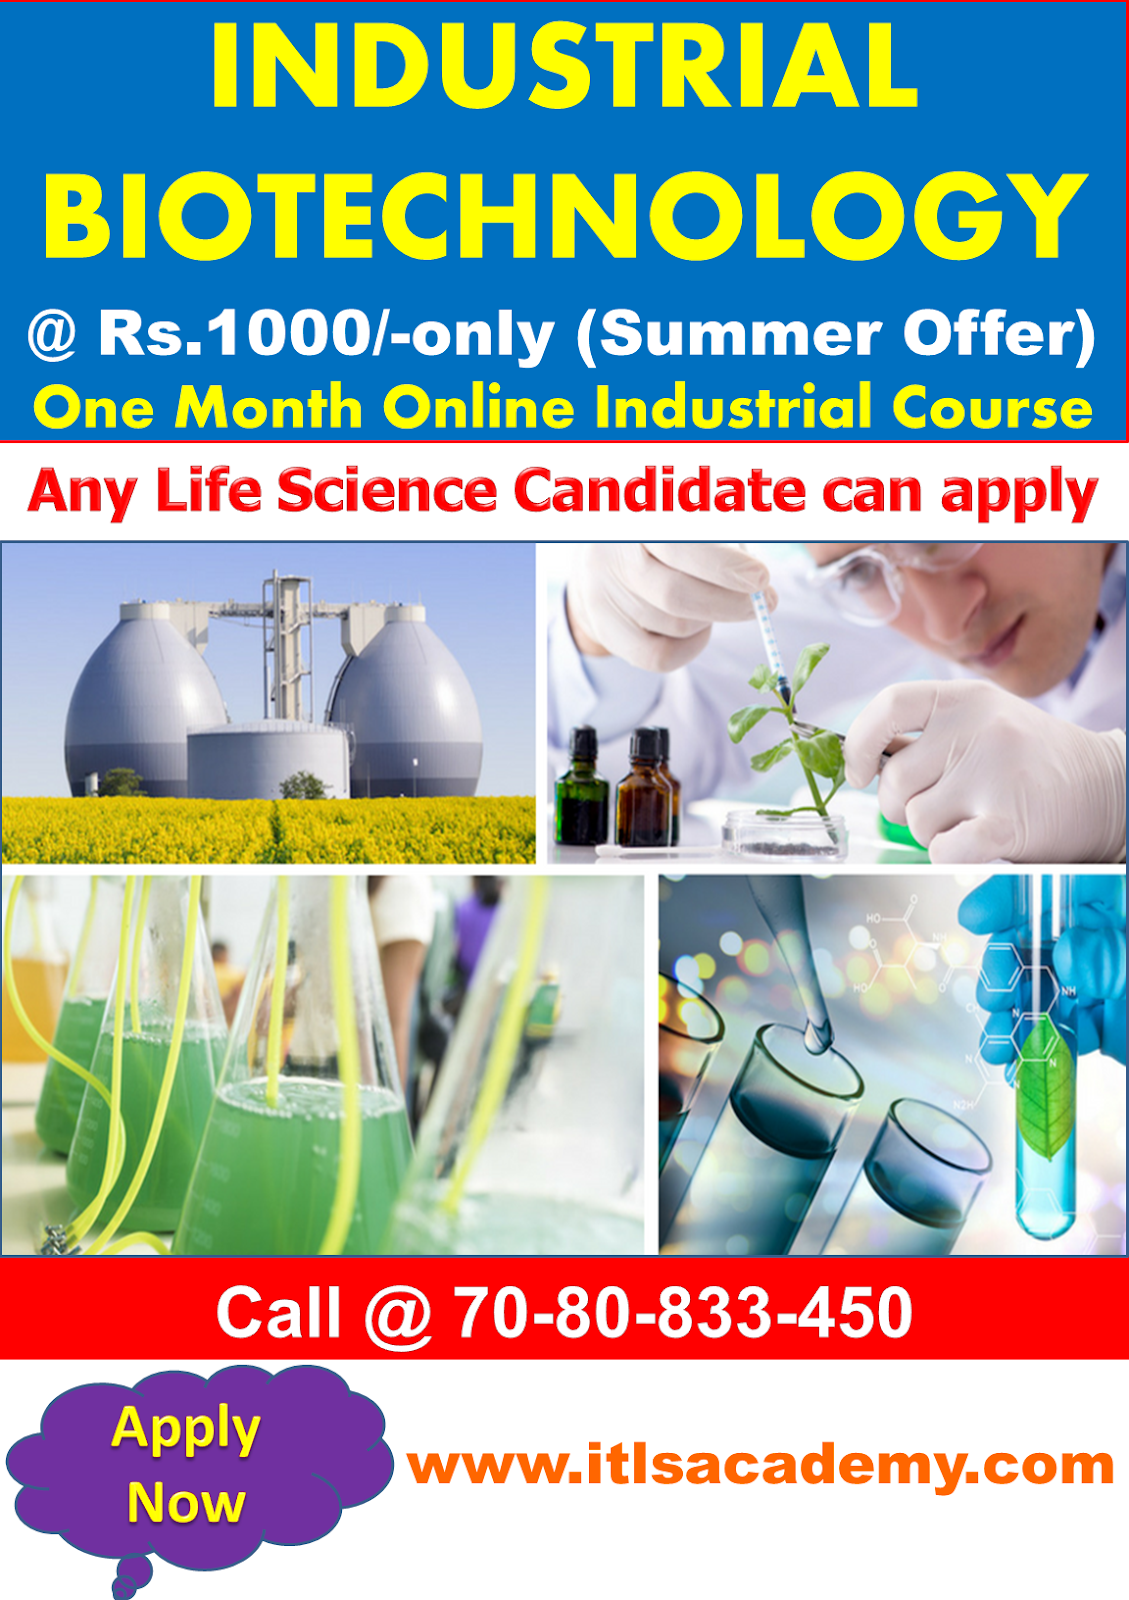 One Month INDUSTRIAL BIOTECHNOLOGY Online Industrial Course Rs. 1,000